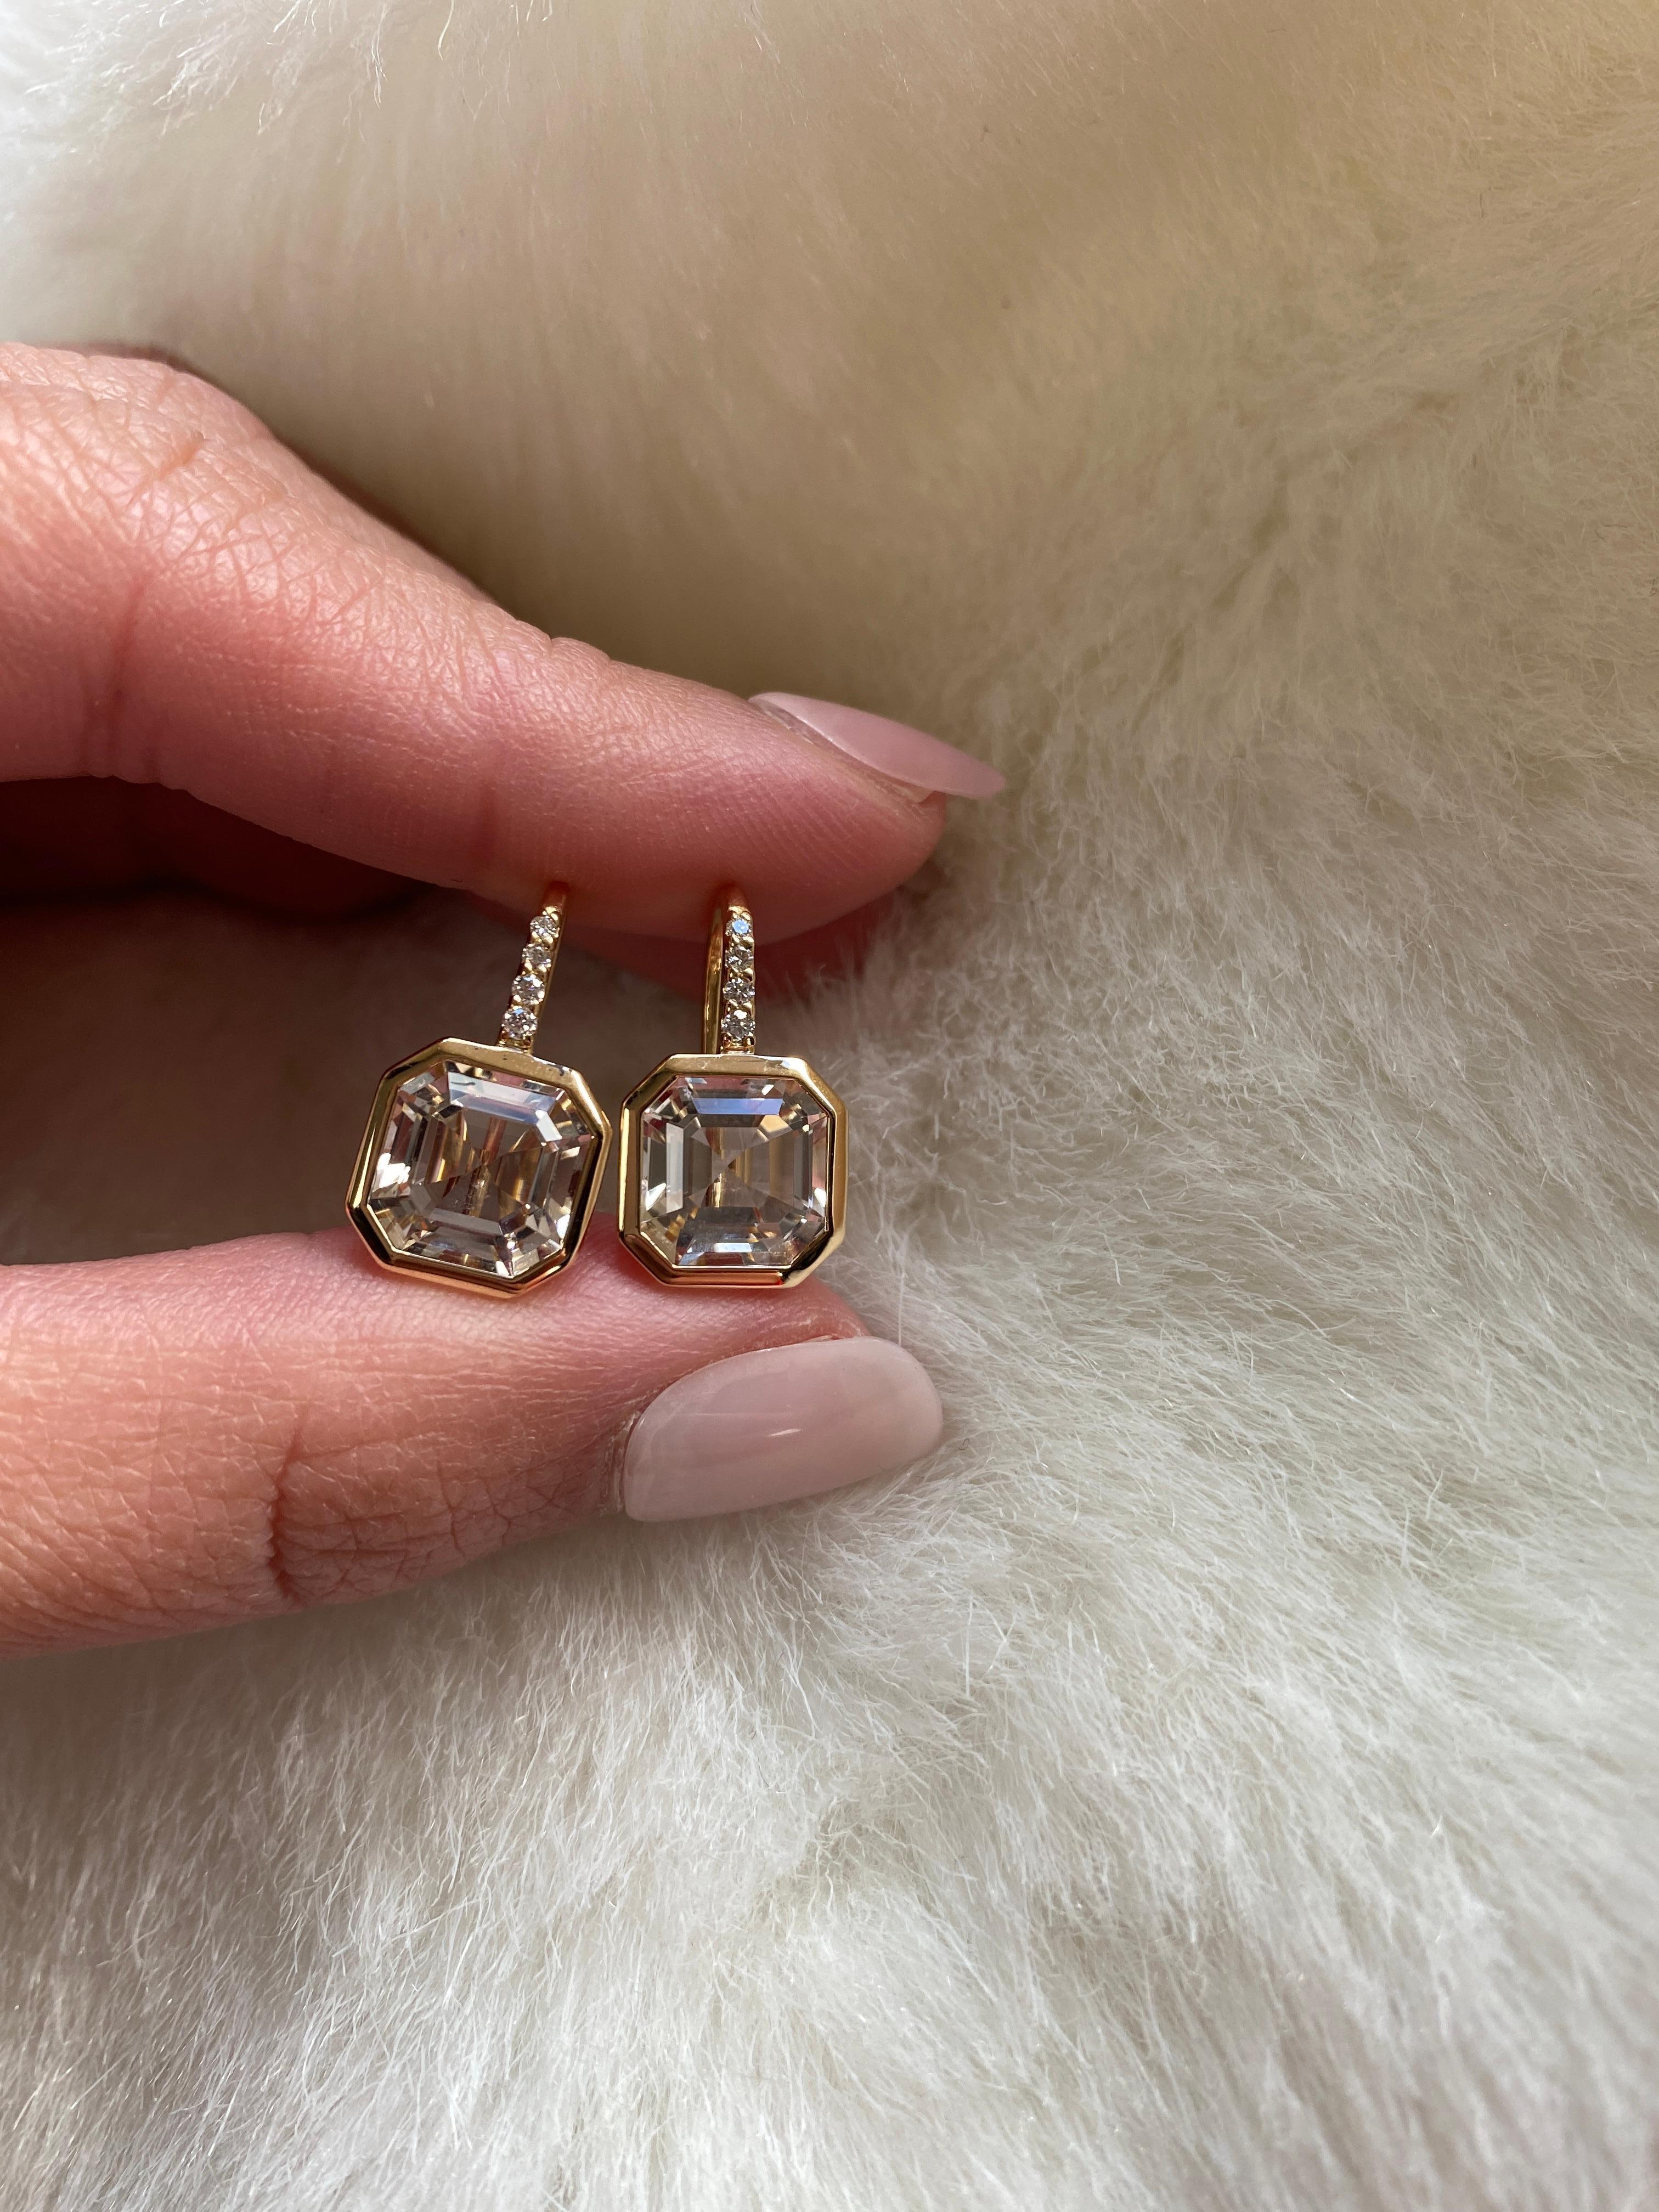 Elevate your style with these exquisite earrings featuring a stunning 9 x 9 mm Asscher-cut Rock Crystal gemstone. Expertly set on a delicate wire of 18K Gold, these earrings are adorned with four dazzling Diamonds, adding a touch of luxury and